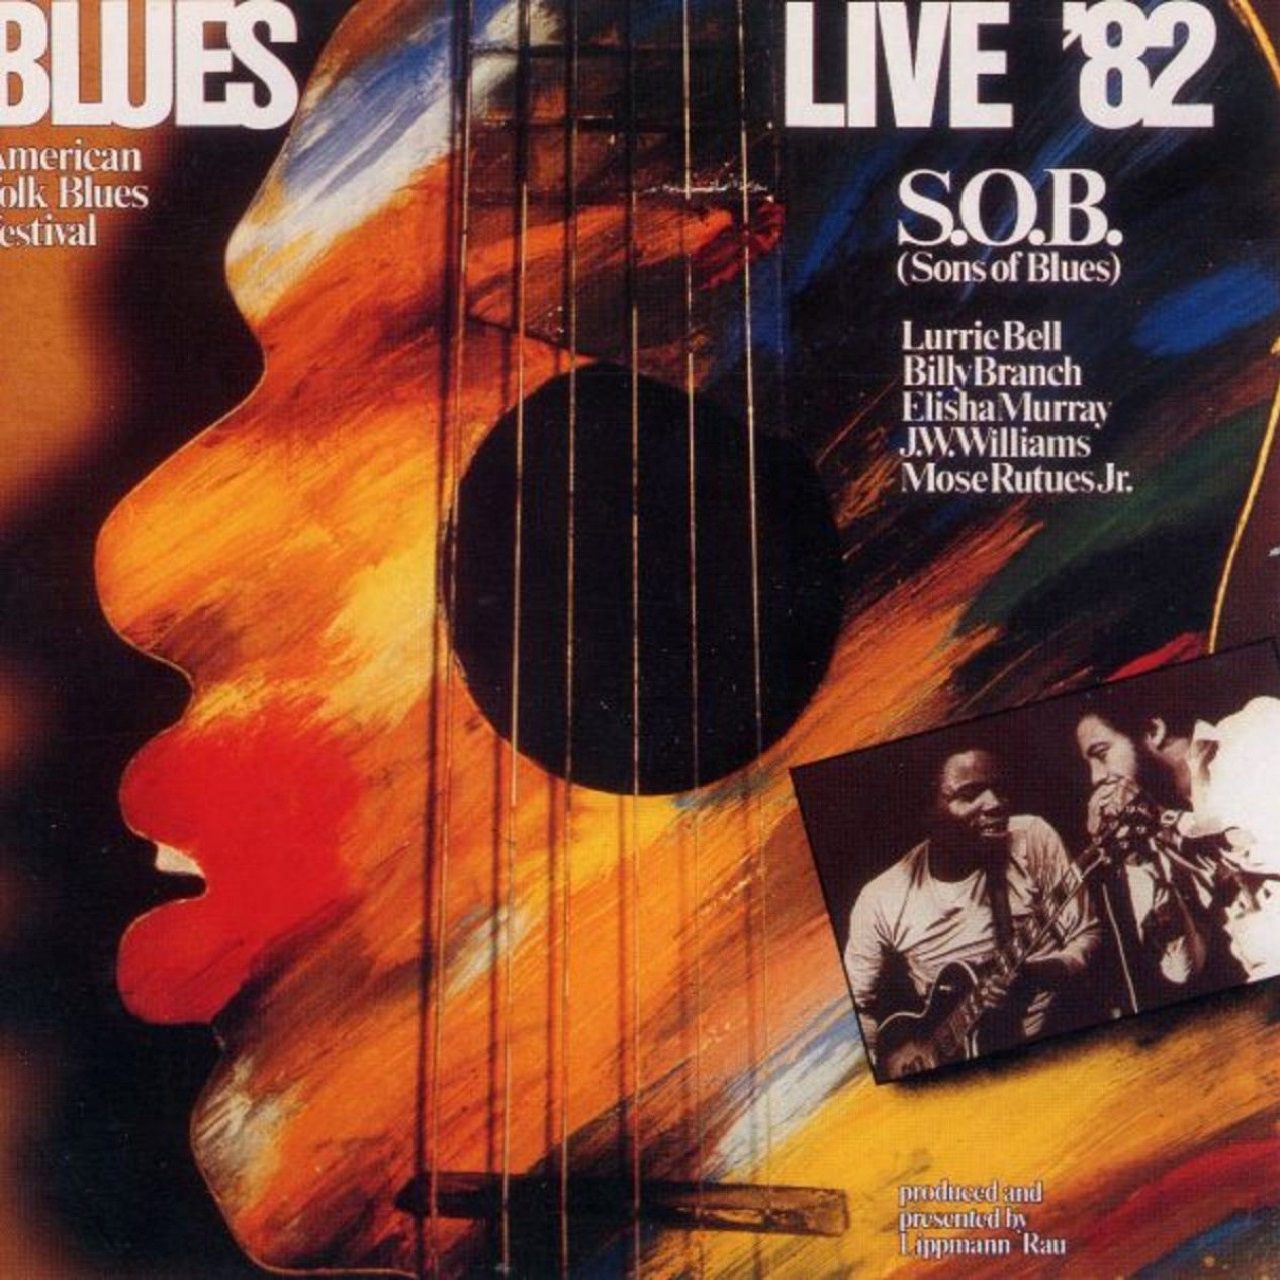 The Sons Of Blues – Live ‘82 cover album